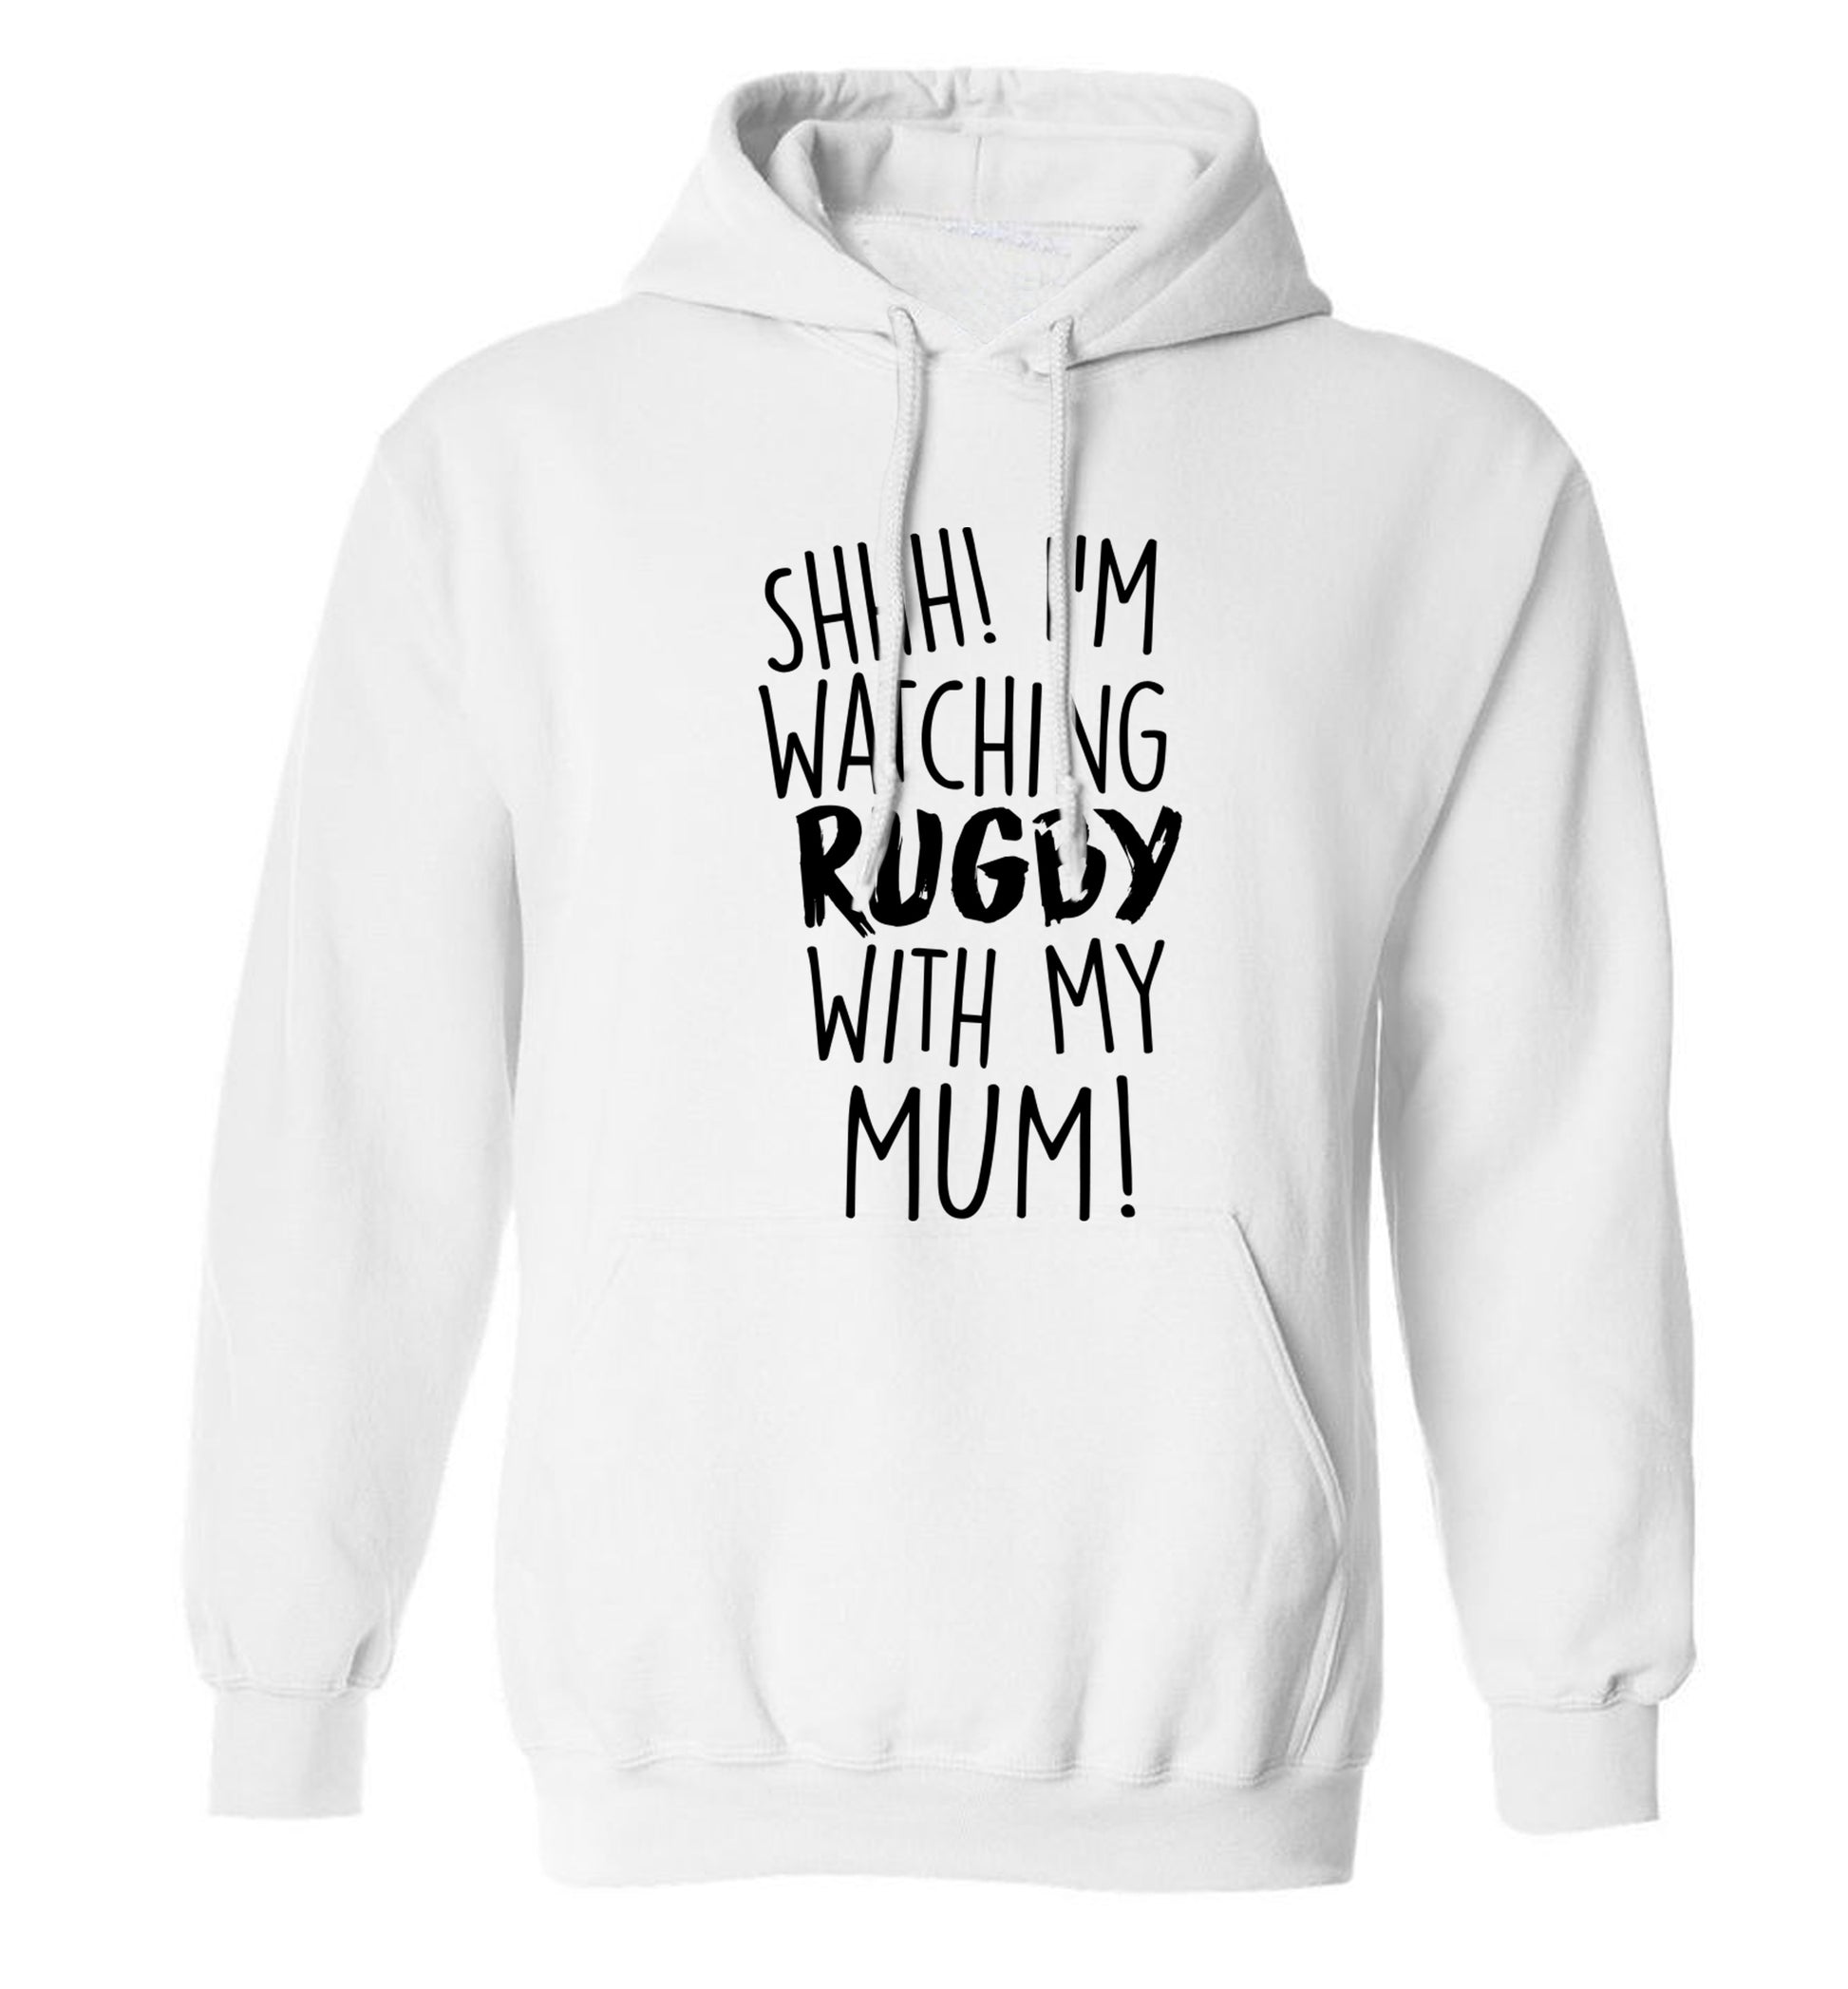 Shh... I'm watching rugby with my mum adults unisex white hoodie 2XL